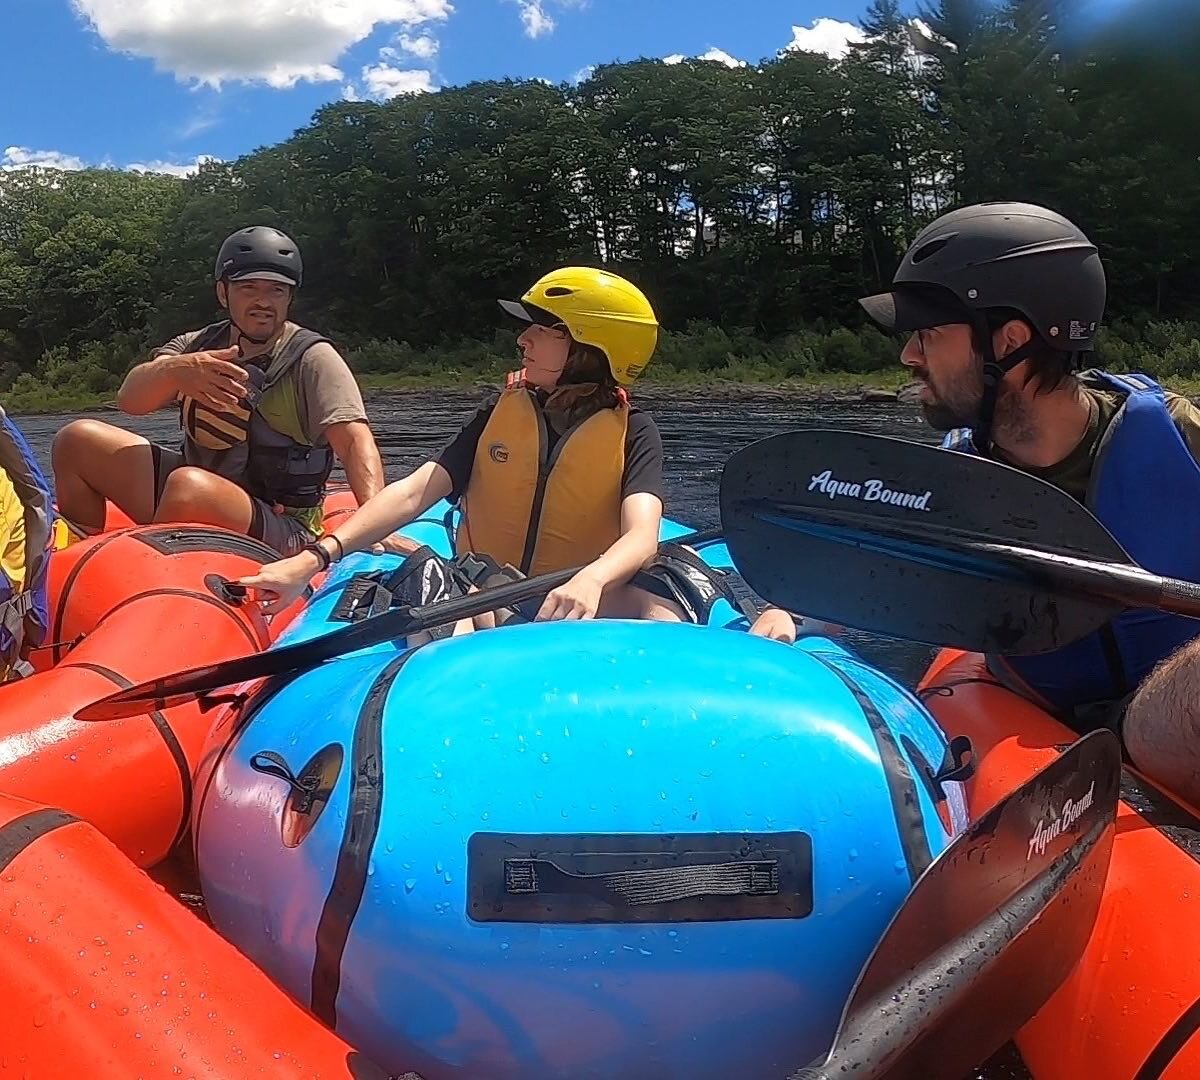 Probably saying something about eddy lines. Fun day of whitewater for a group of first time packrafters.
.
.
.
#thisispackrafting #mainewhitewater #mainepaddling #maineguide #packraftmaine